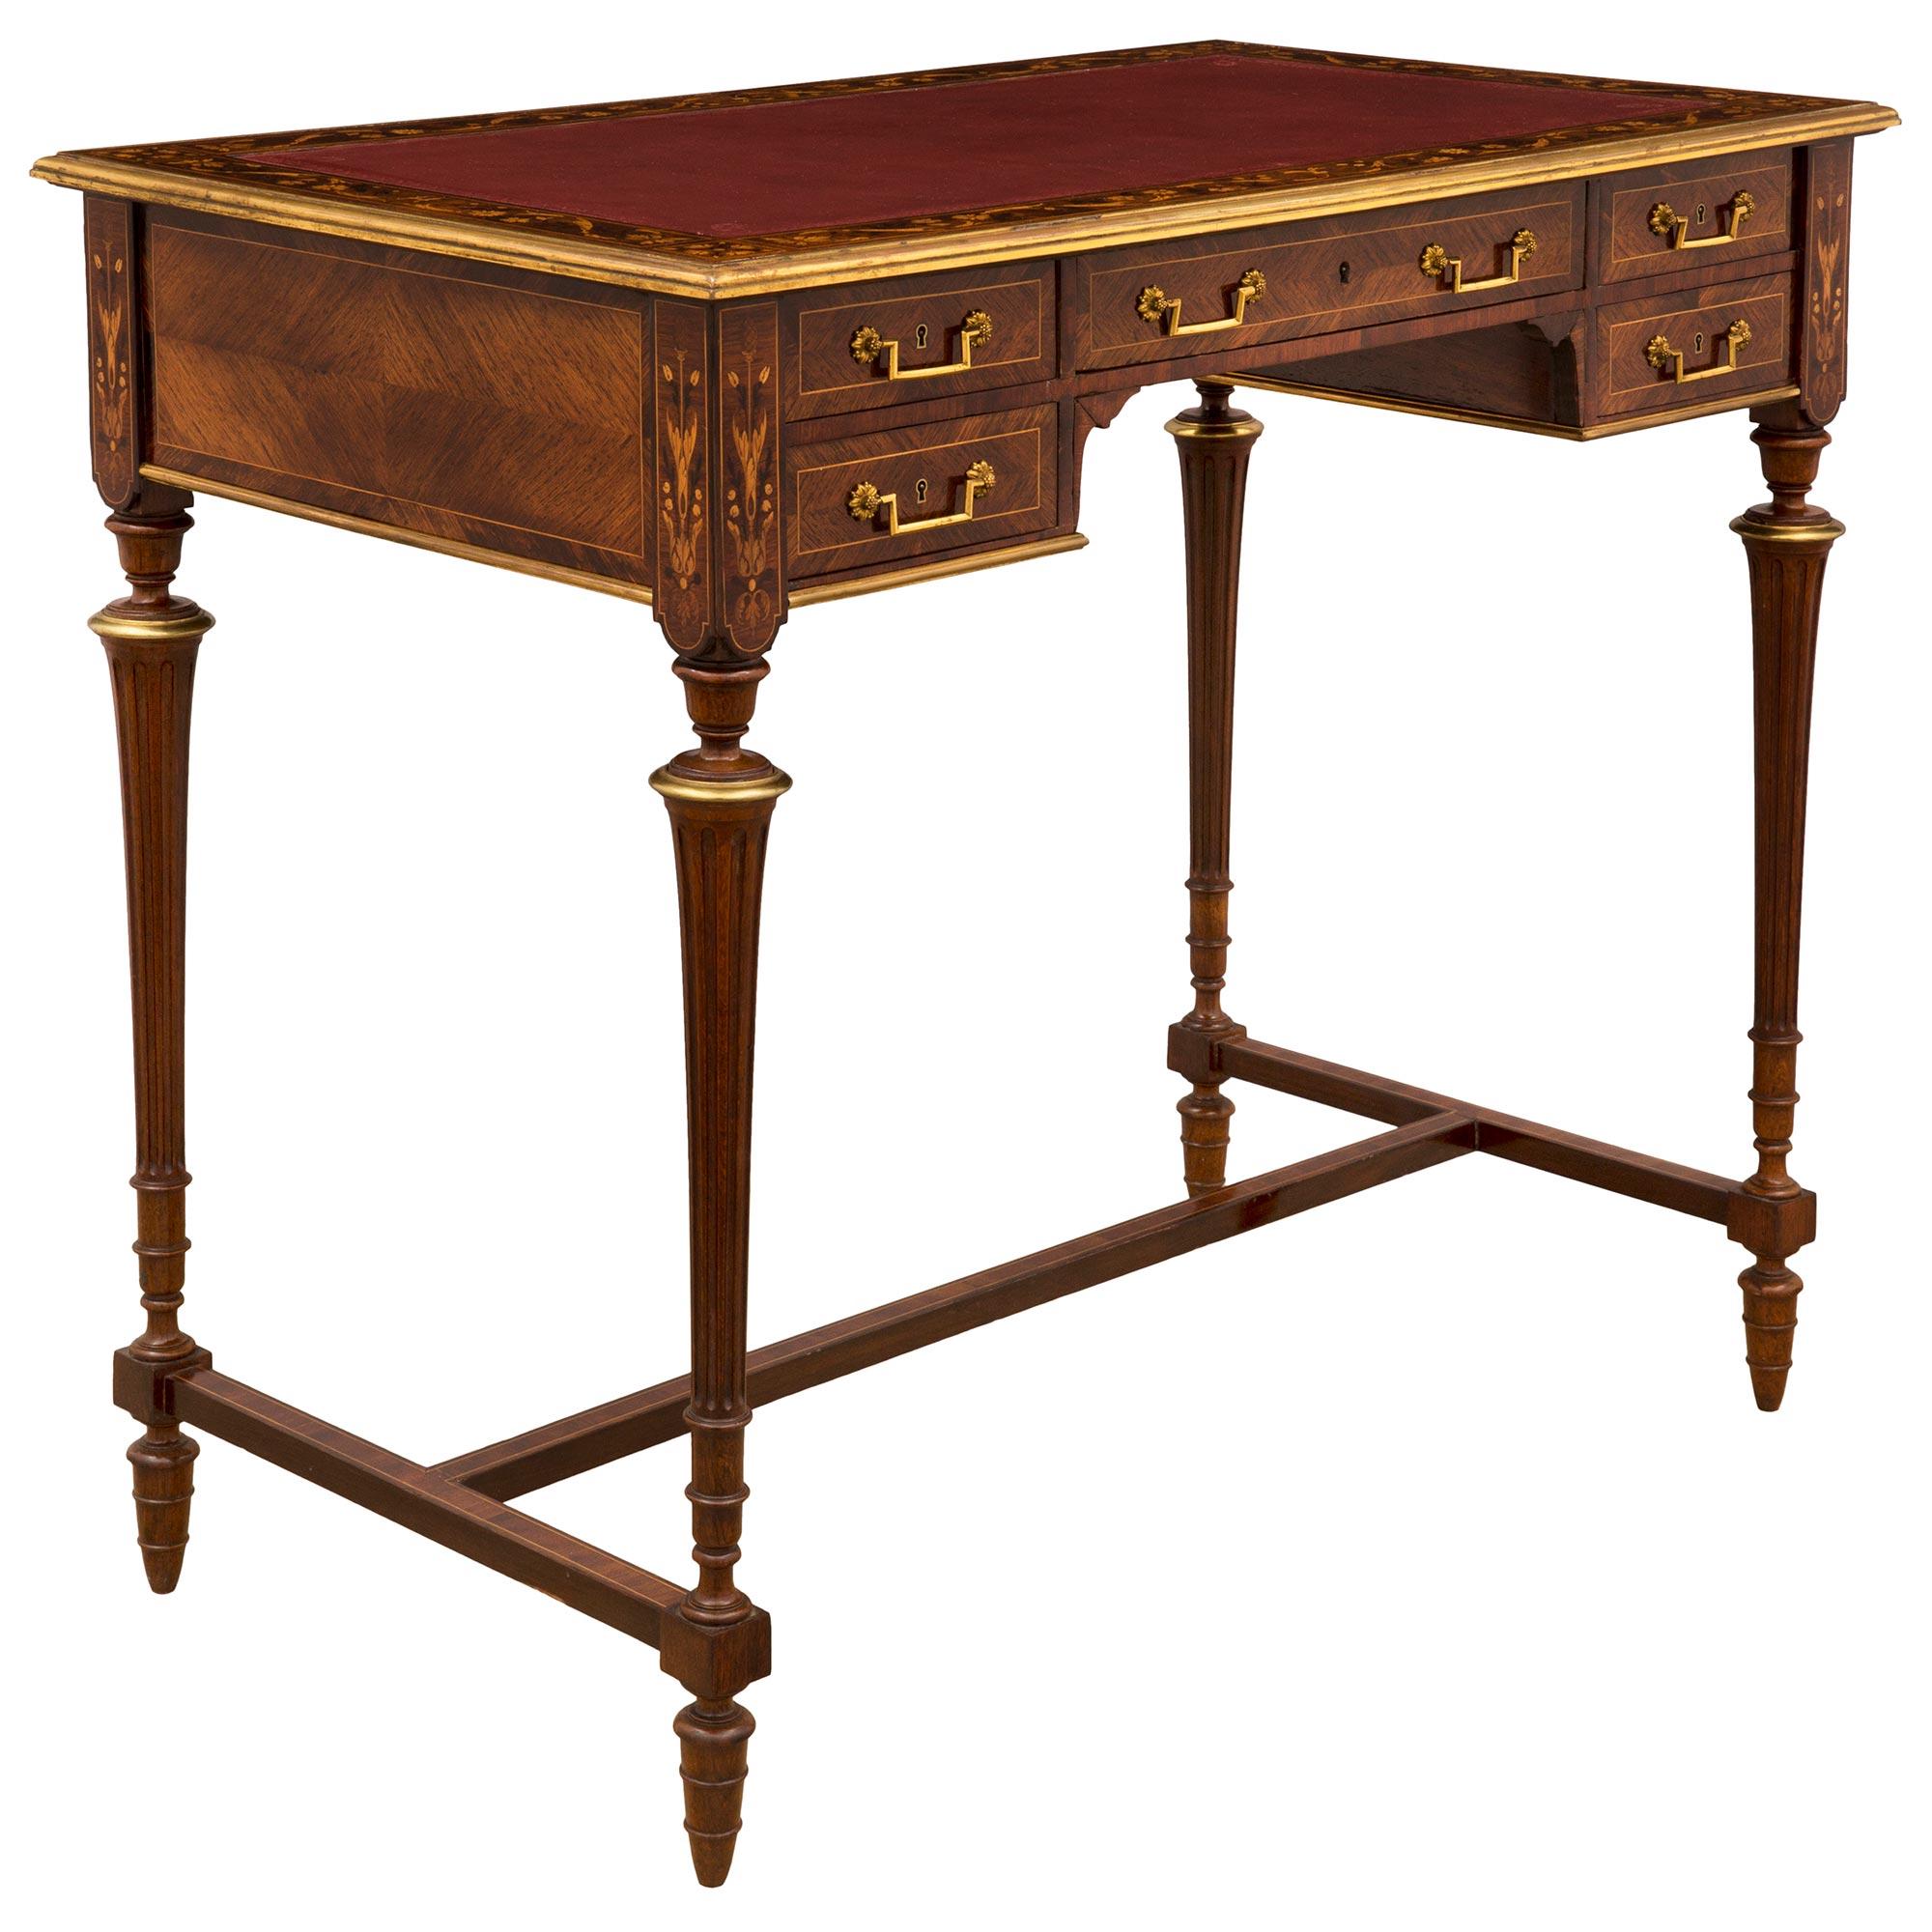 English 19th Century Louis XVI St. Kingwood, Tulipwood and Ormolu Desk In Good Condition For Sale In West Palm Beach, FL